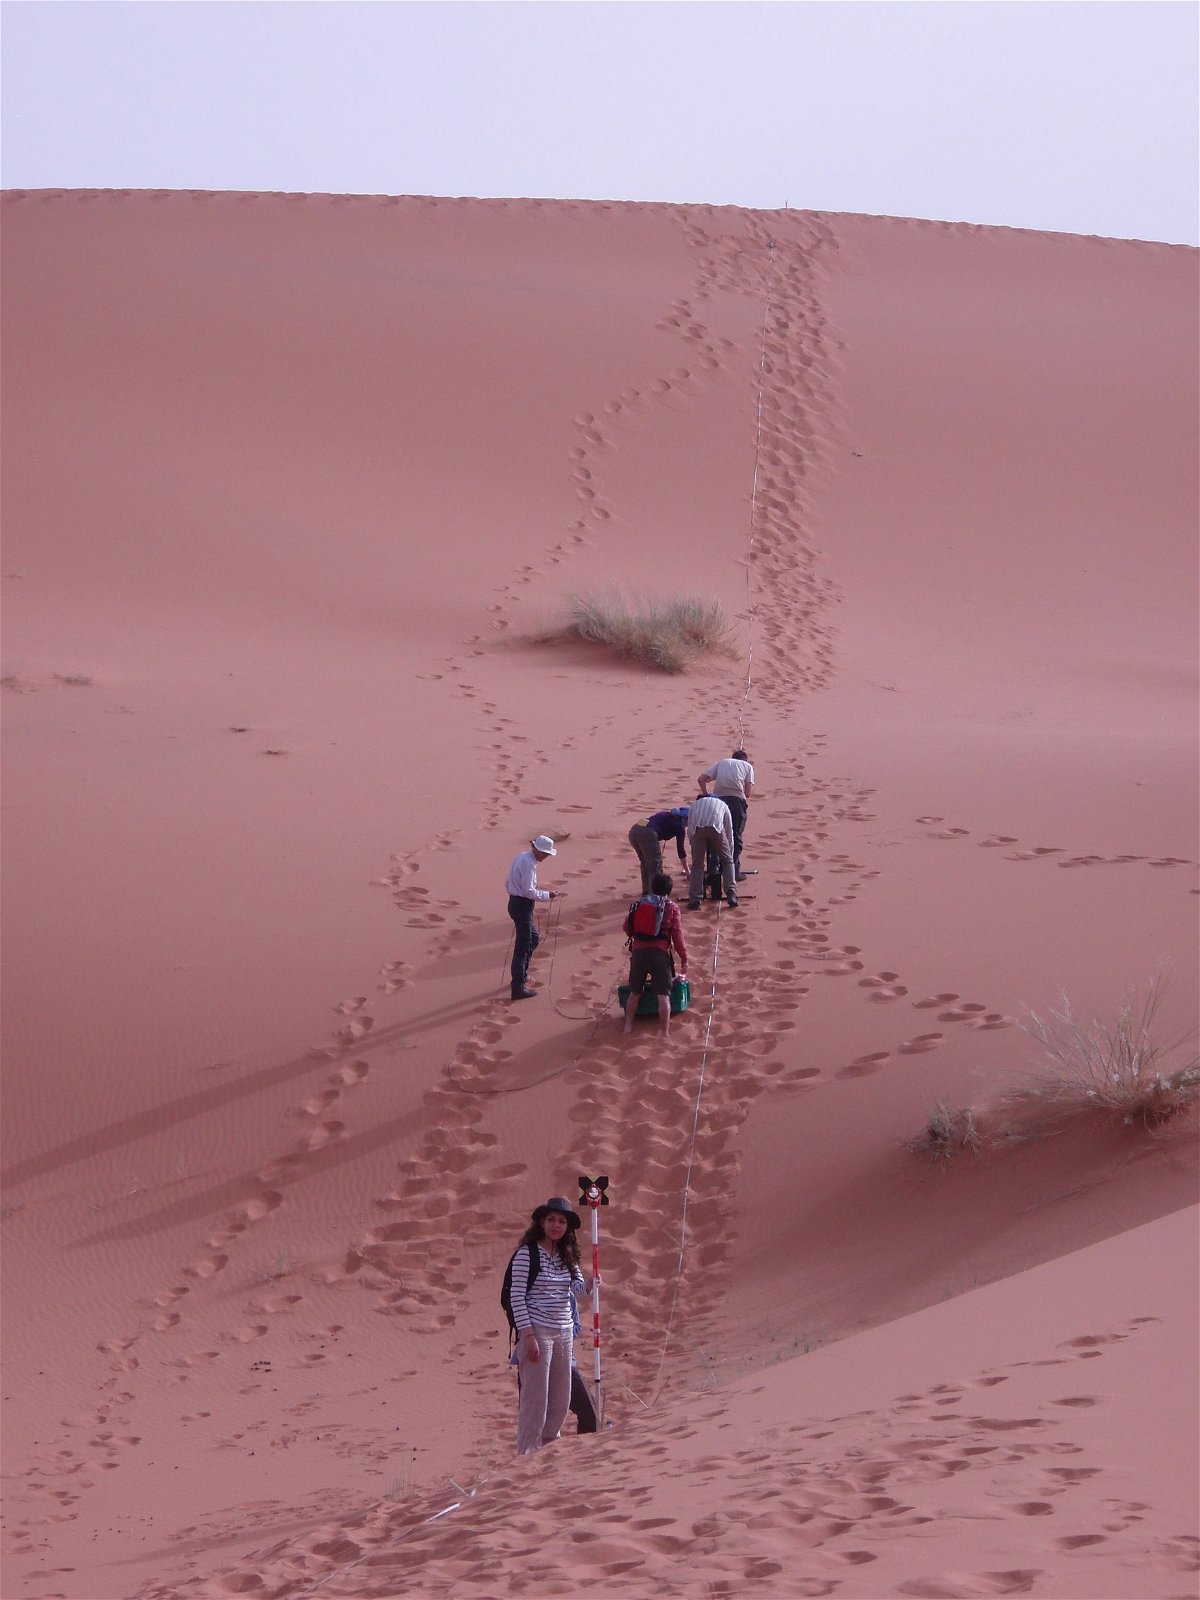 Geology students from the University of London's Birkbeck College survey the star dune at Erg Chebbi.